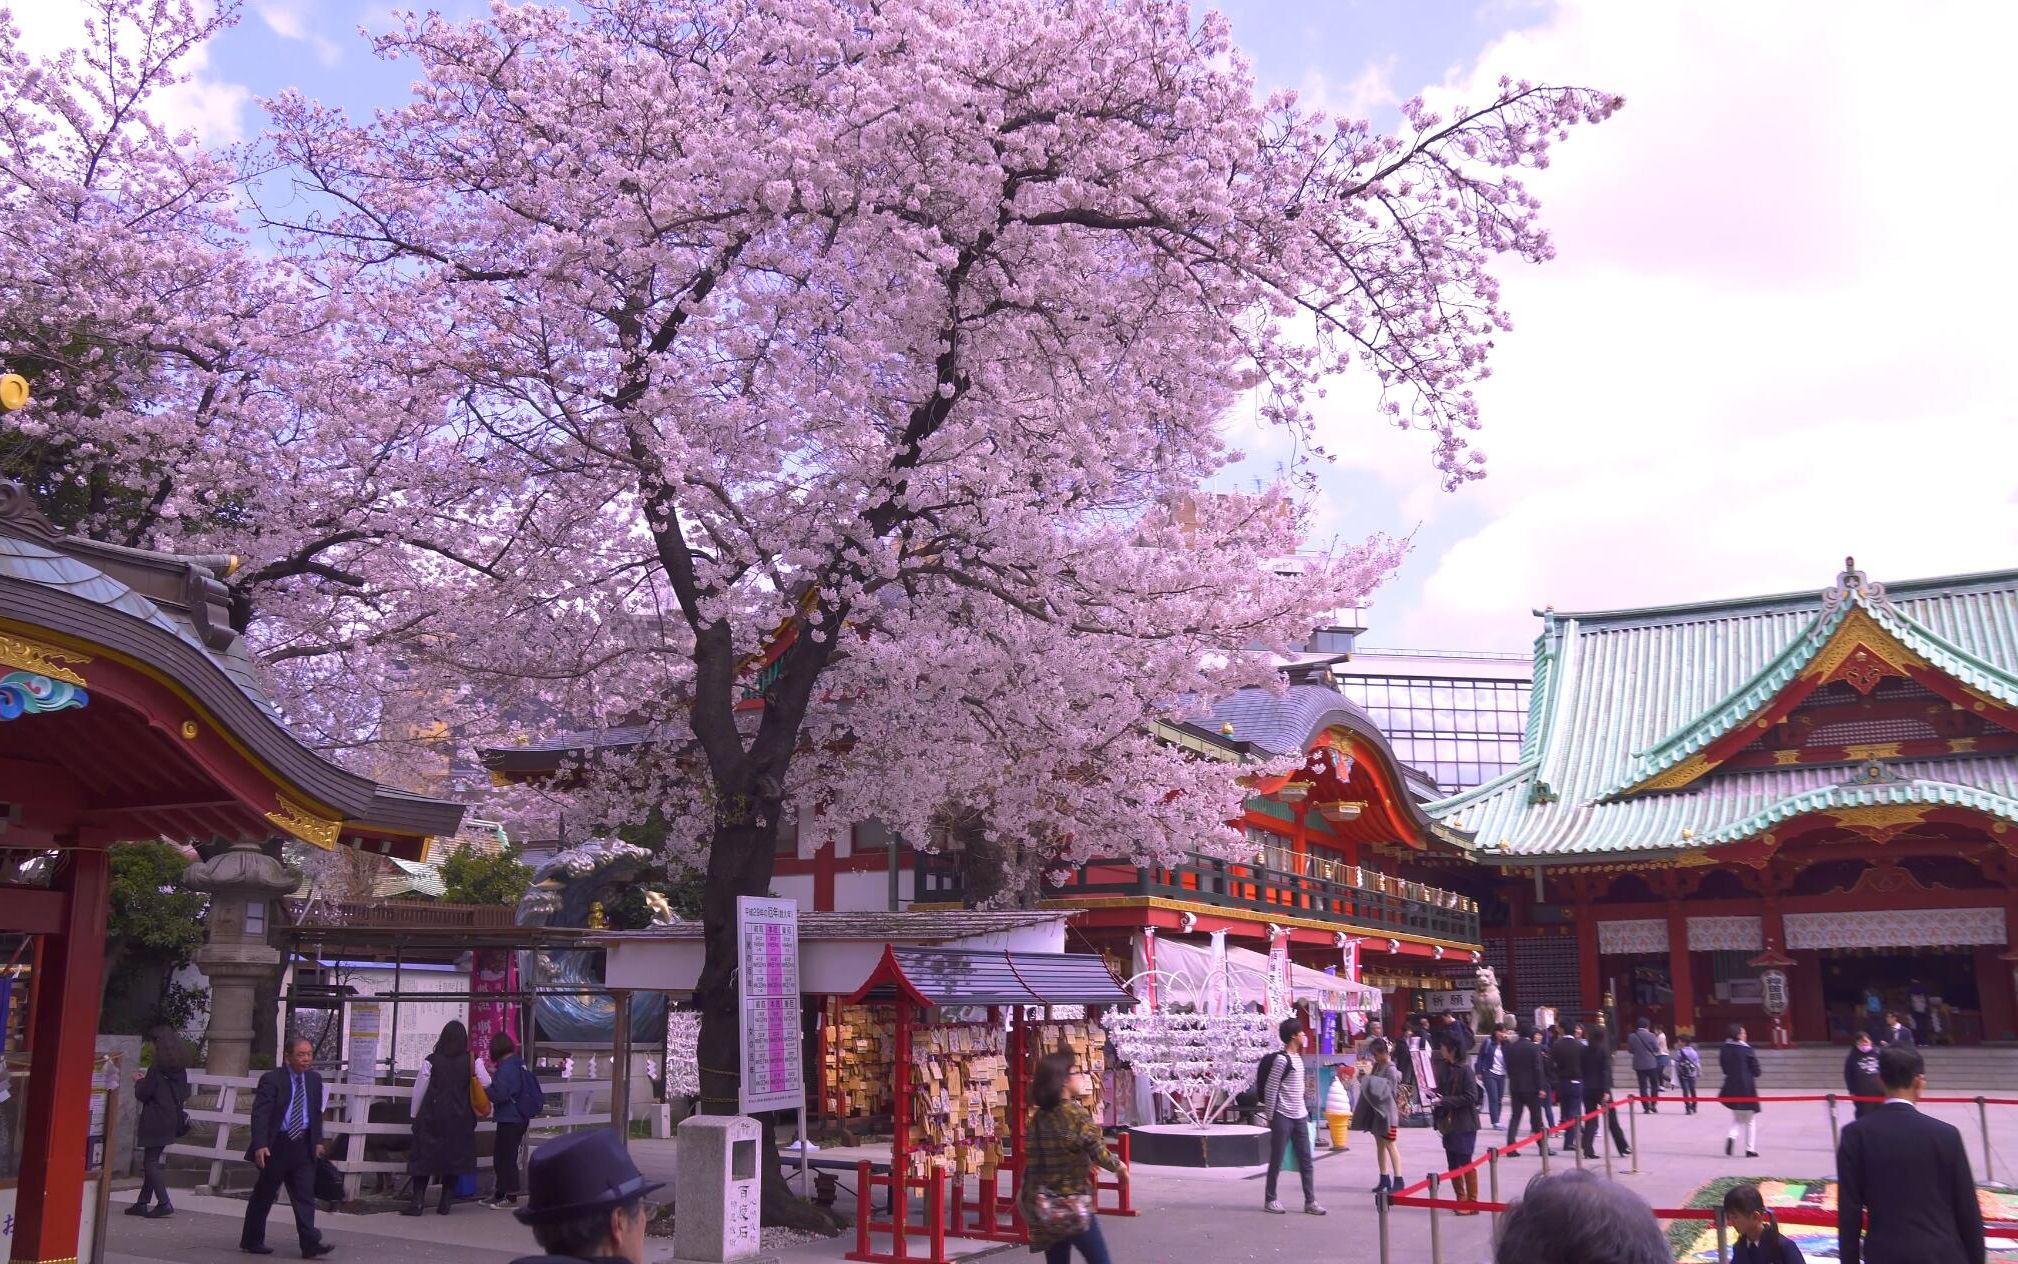 2020 2021 All Top 13 Best Cherry Blossom Spots Guide And Viewing Date In Tokyo Japan Cherry Blossom Guide Japanese Cherry Blossom Festival,Chocolate Warm Balayage Chocolate Warm Dark Brown Hair Color